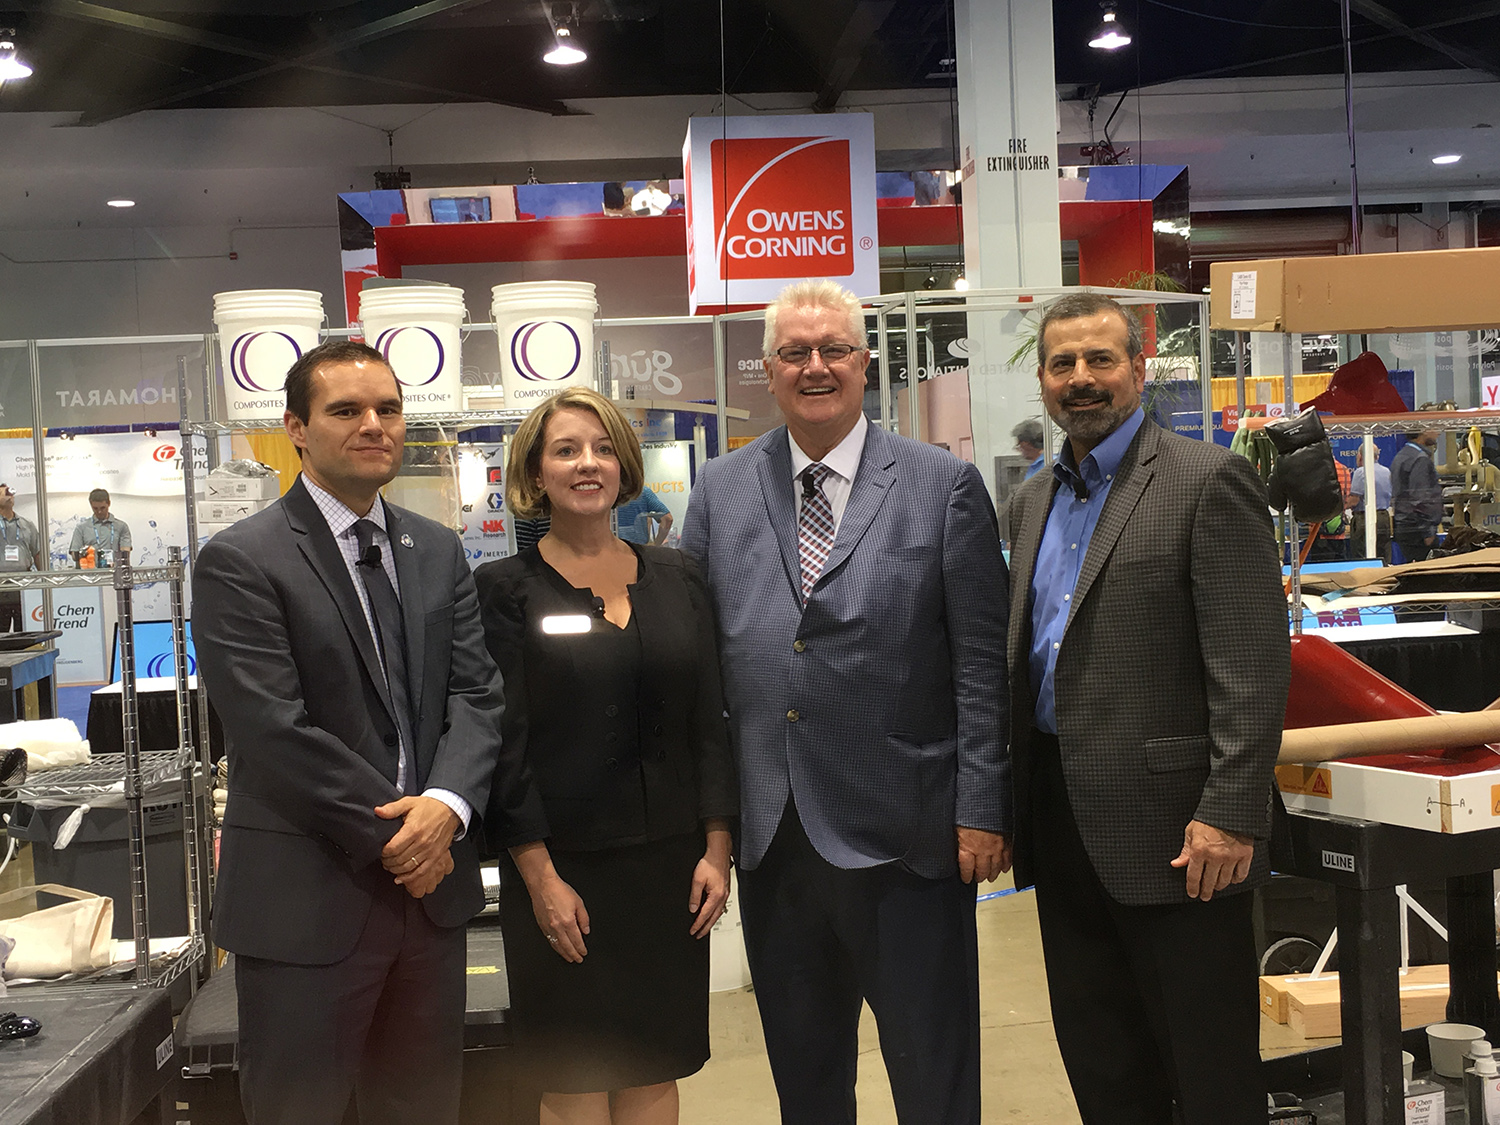 From left to right: Ben Hart, managing director, urban and rural business services, Utah Governor’s Office of Economic Development; Robin Pate, IACMI workforce & communications director, Michael Bouwhuis, DATC president and Composites One president and COO Leon Garoufalis.